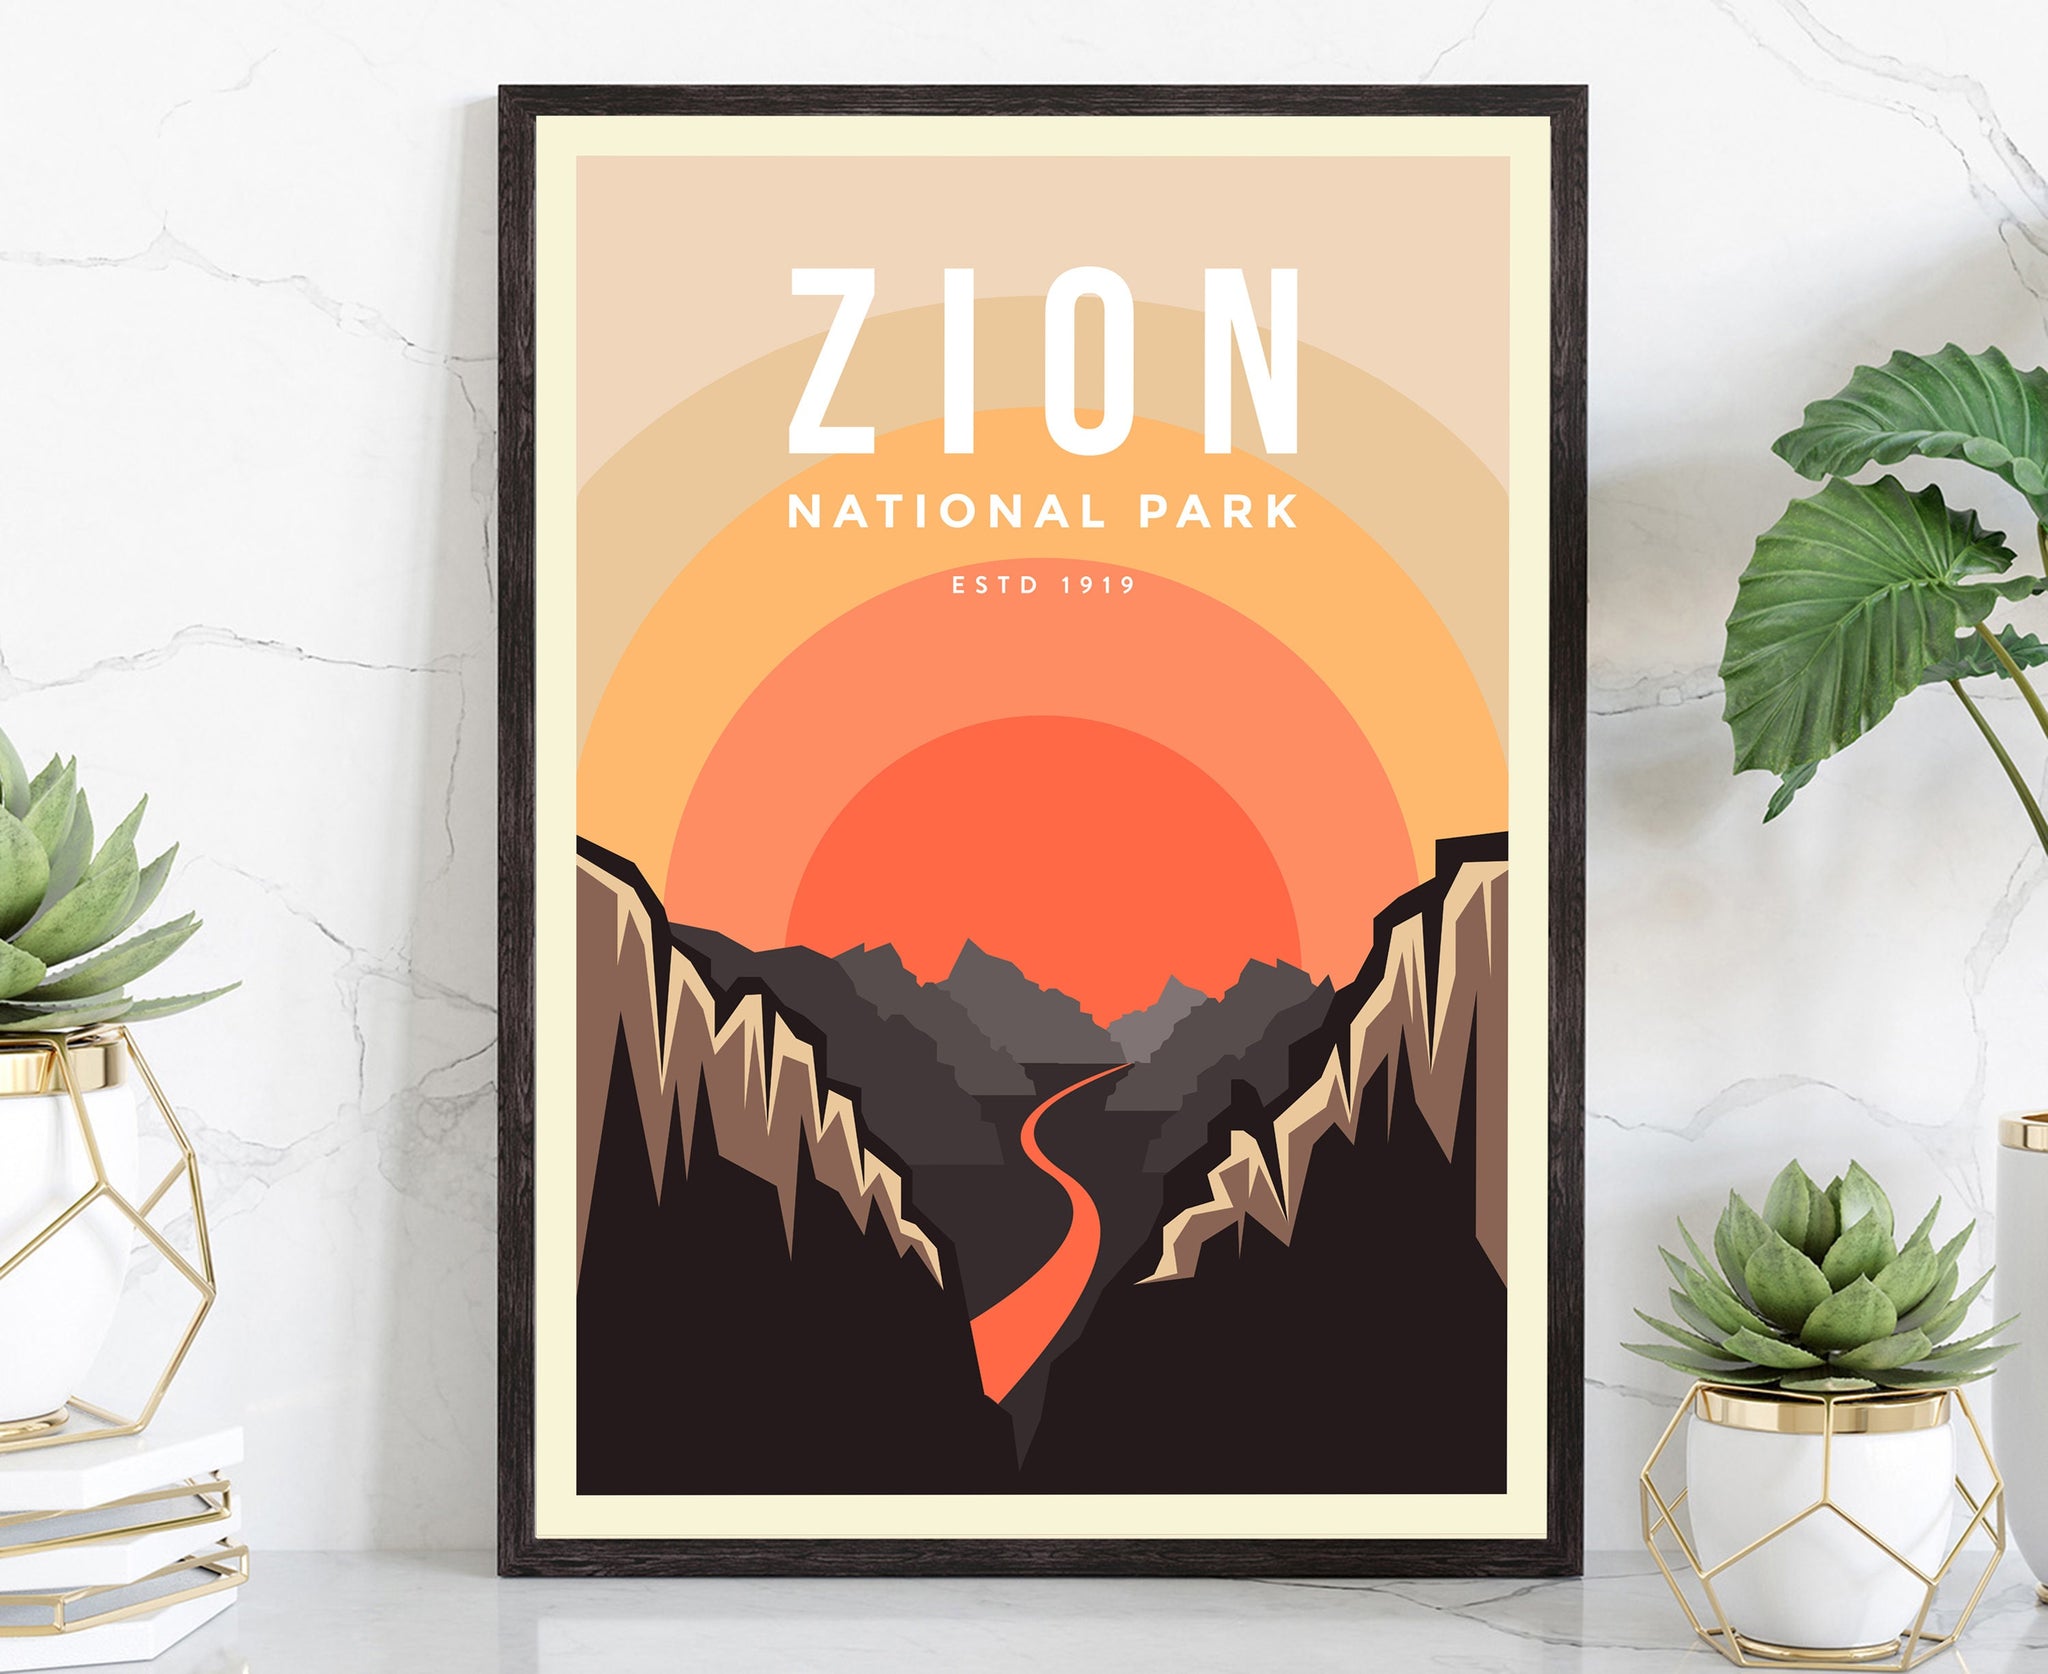 Zion National Park, Retro Travel Poster Print, Zion National park in Utah, Housewarming Gift, Office Wall Art, Utah Vintage Posters